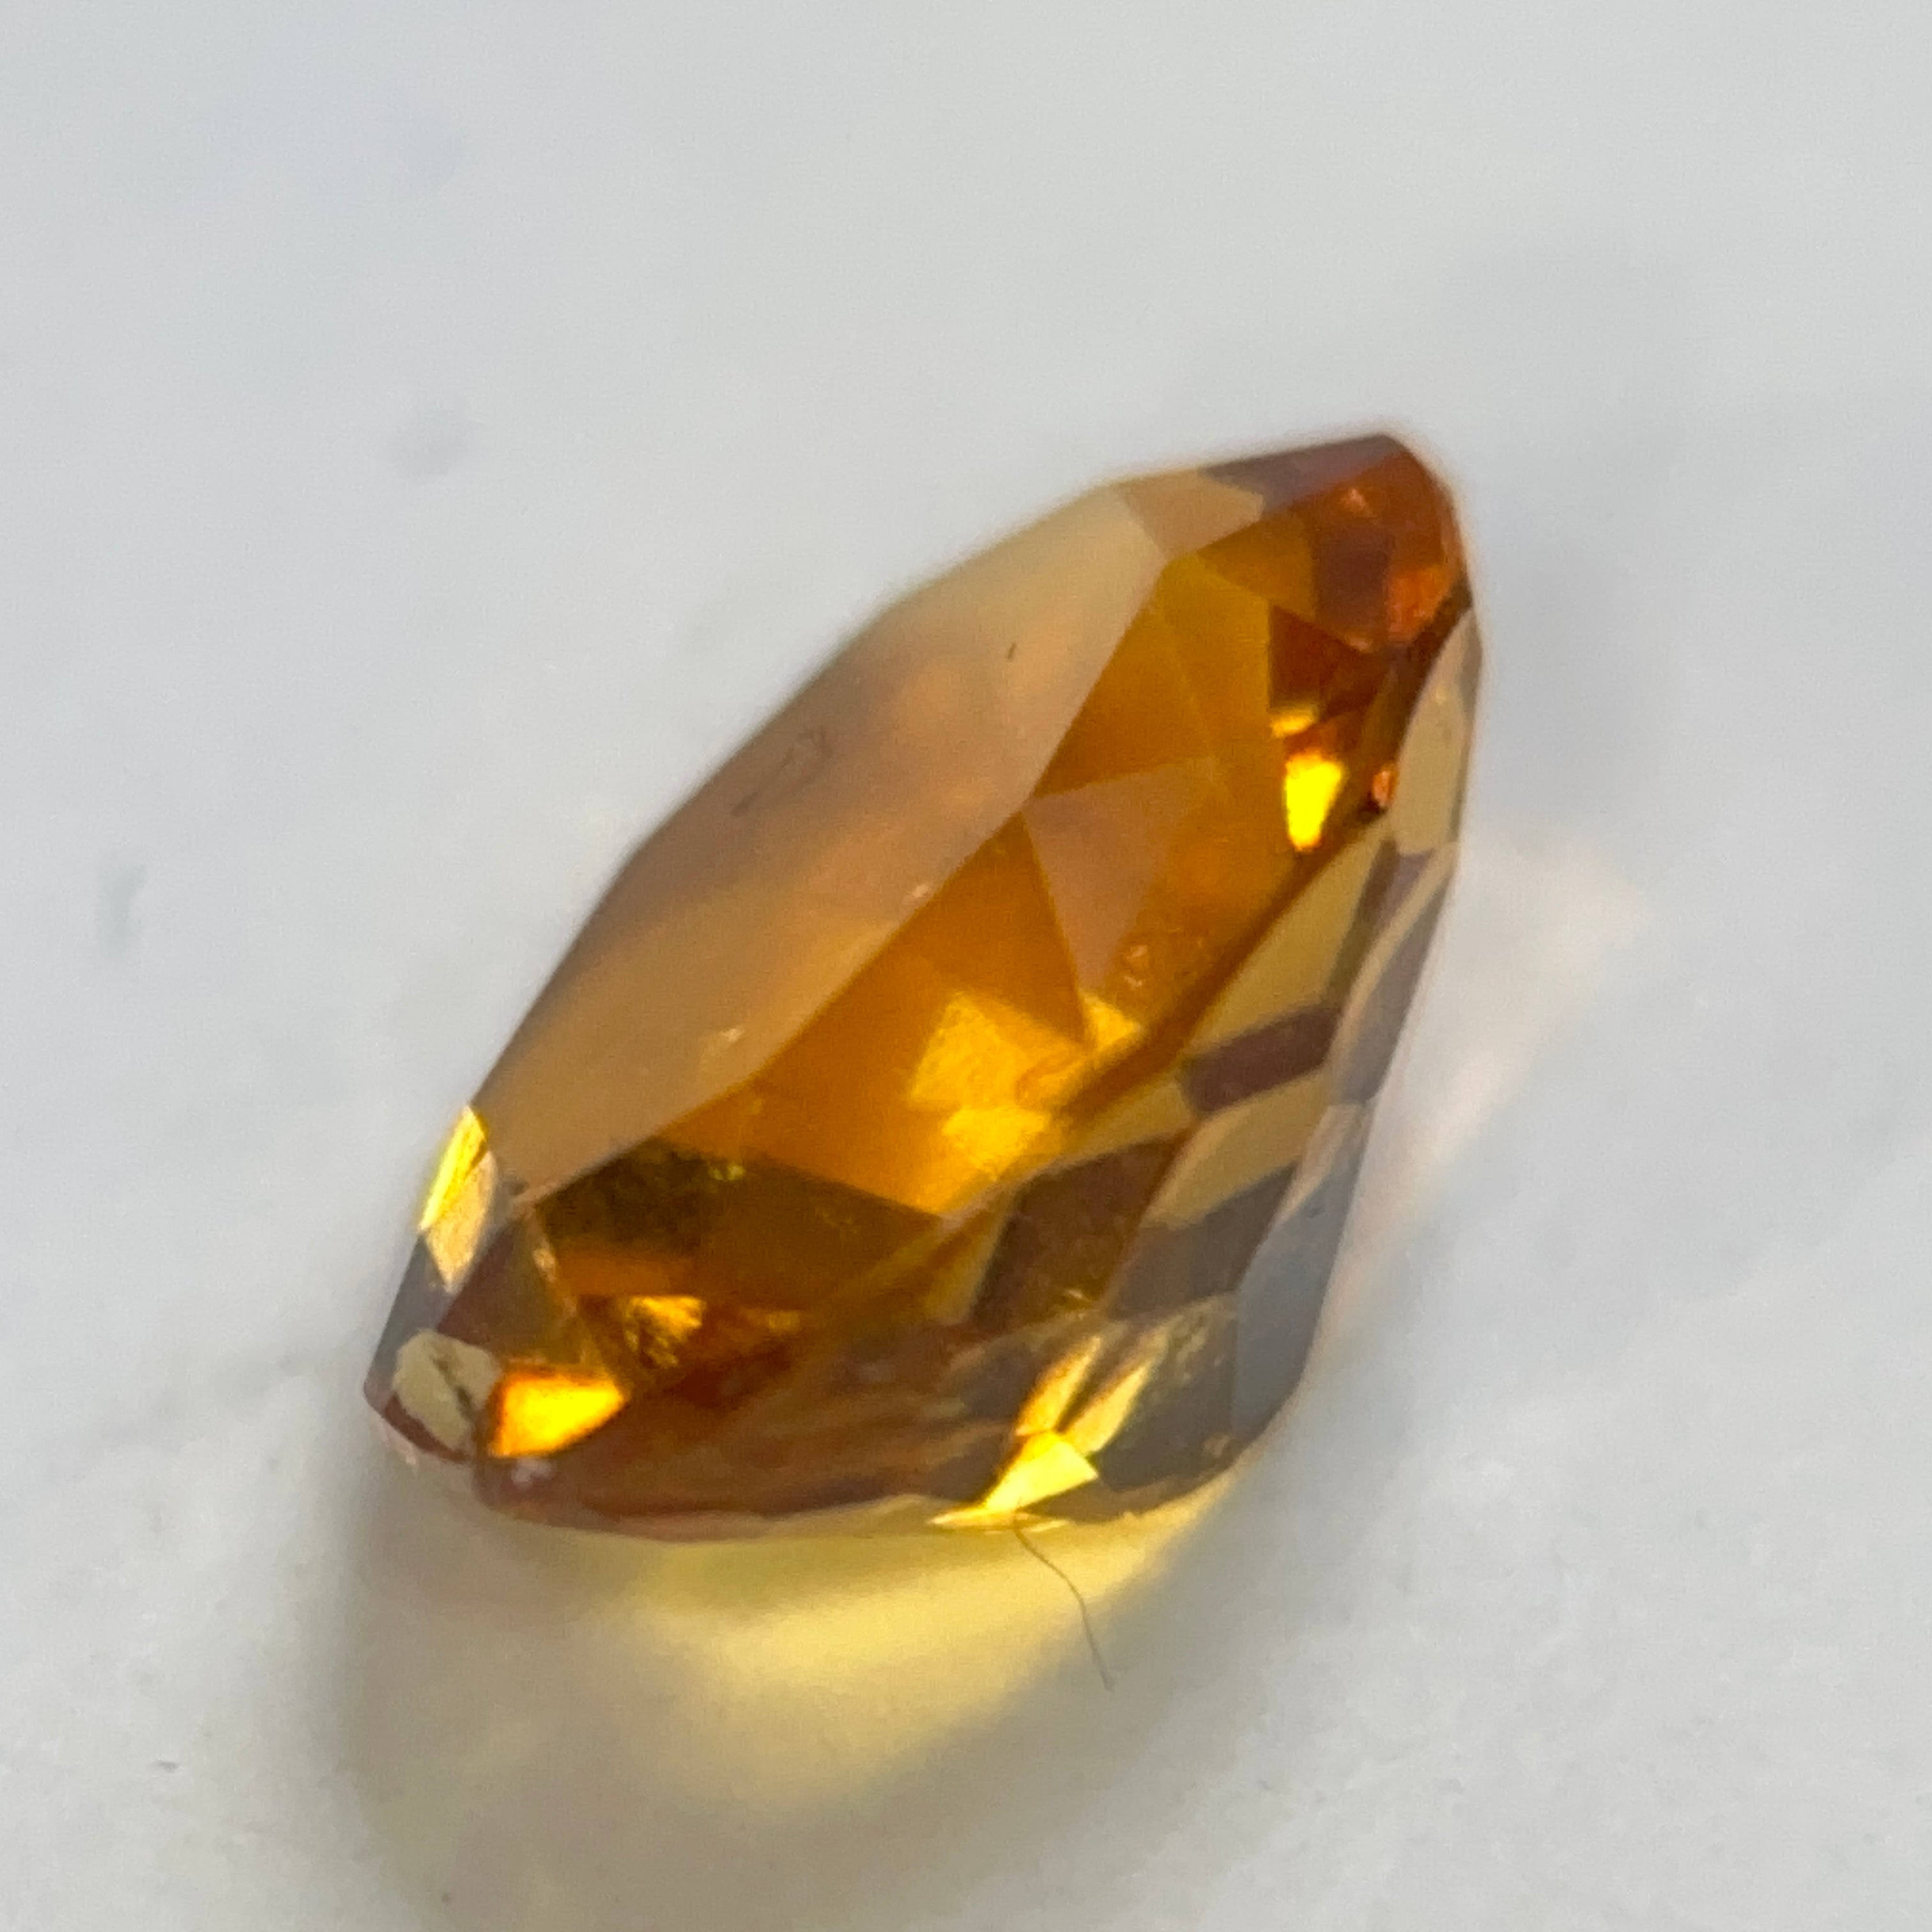 1.62ct Tourmaline, Untreated Unheated, slightly included